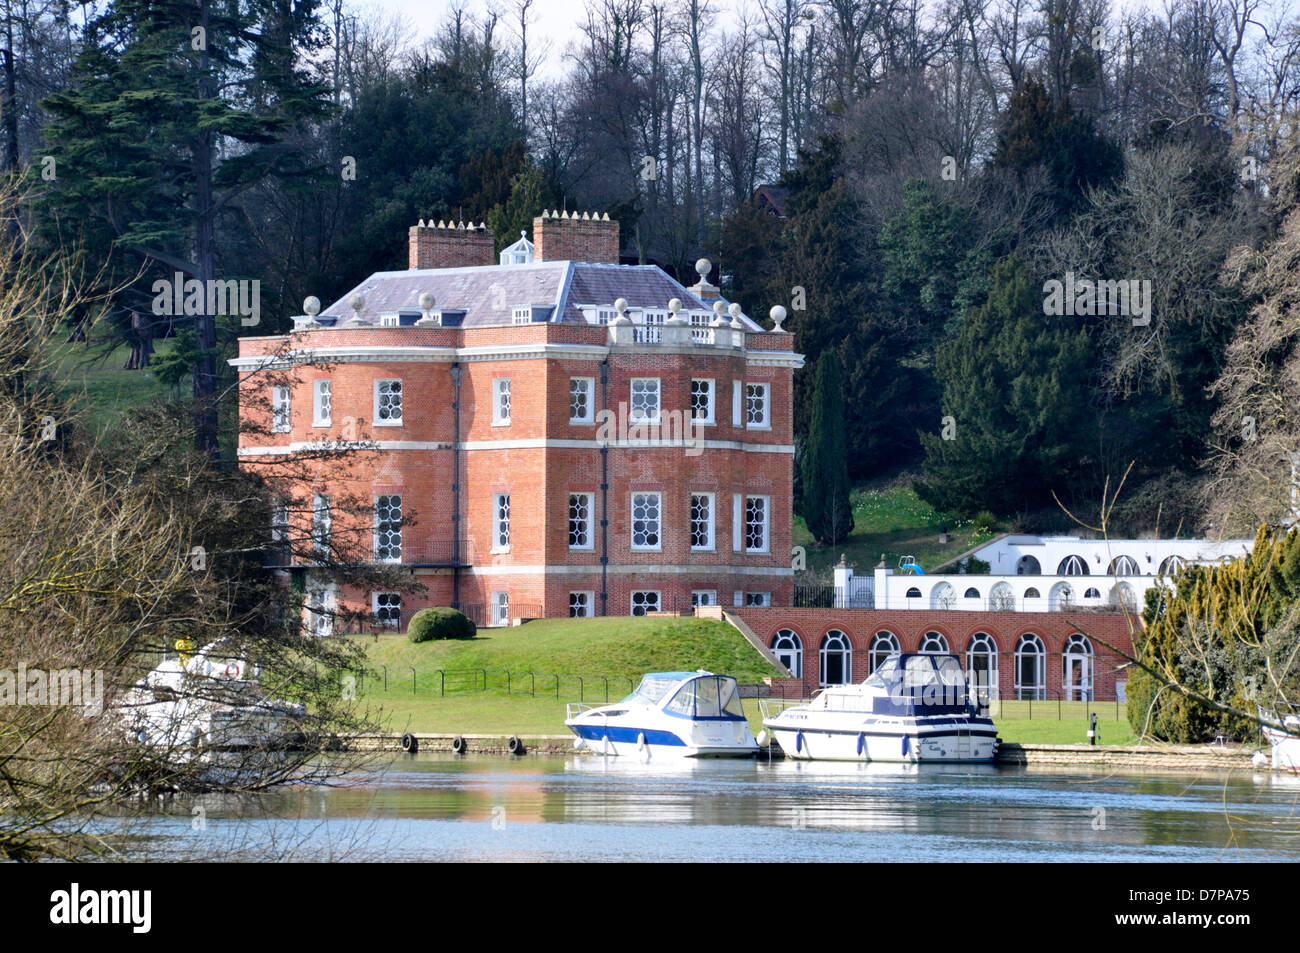 Buckinghamshire - Harleyford Manor - on banks of Thames - built 1755 - Neoclassical style - beautiful setting - early spring. Stock Photo